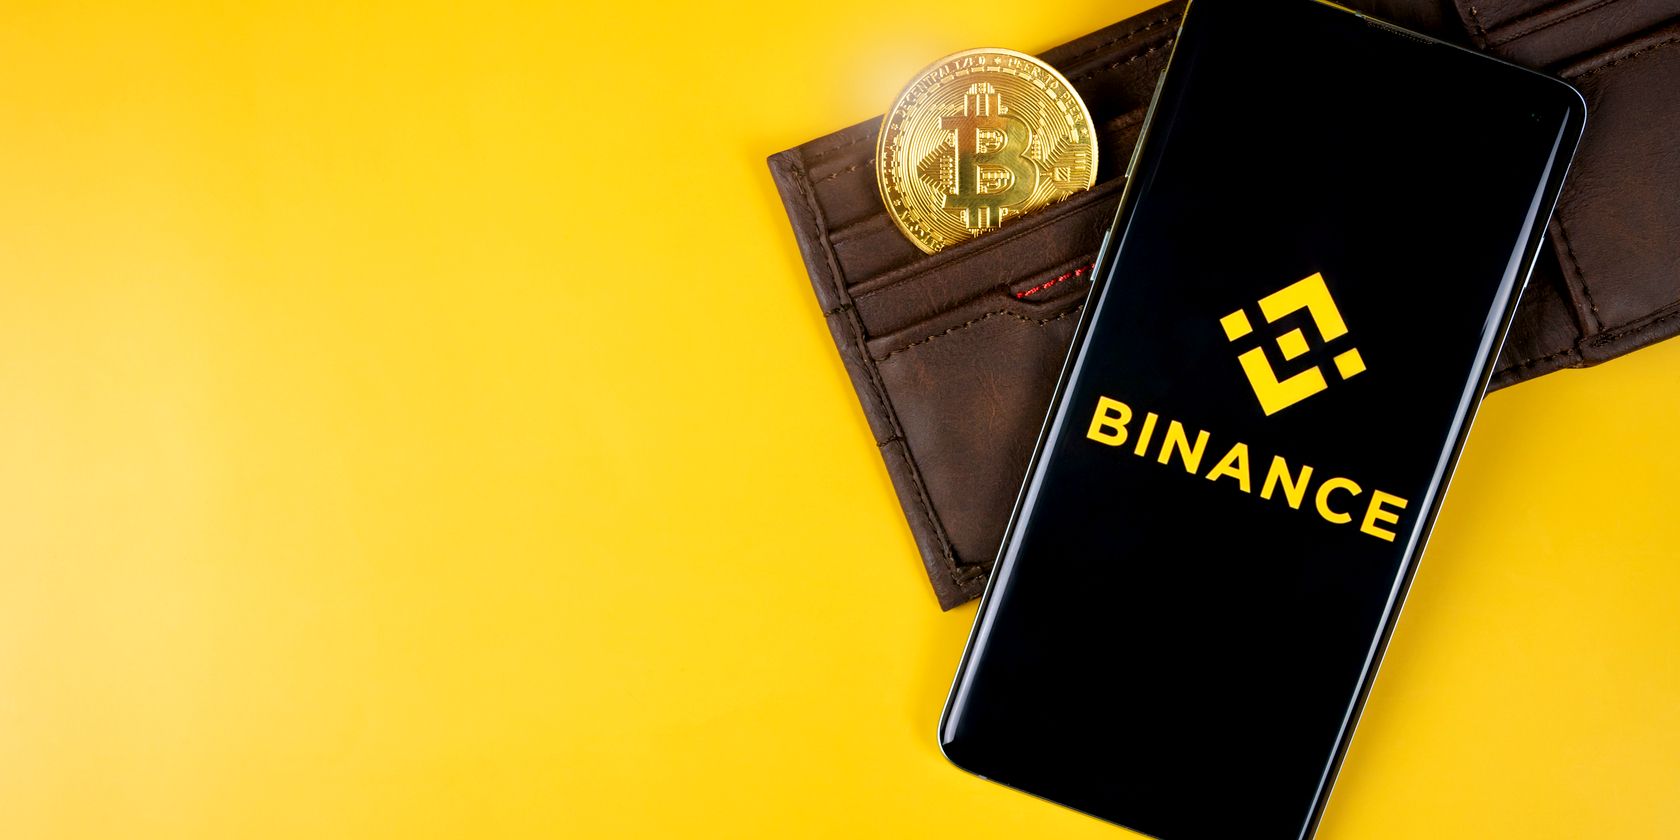 binance logo on smartphone with bitcoin in wallet feature